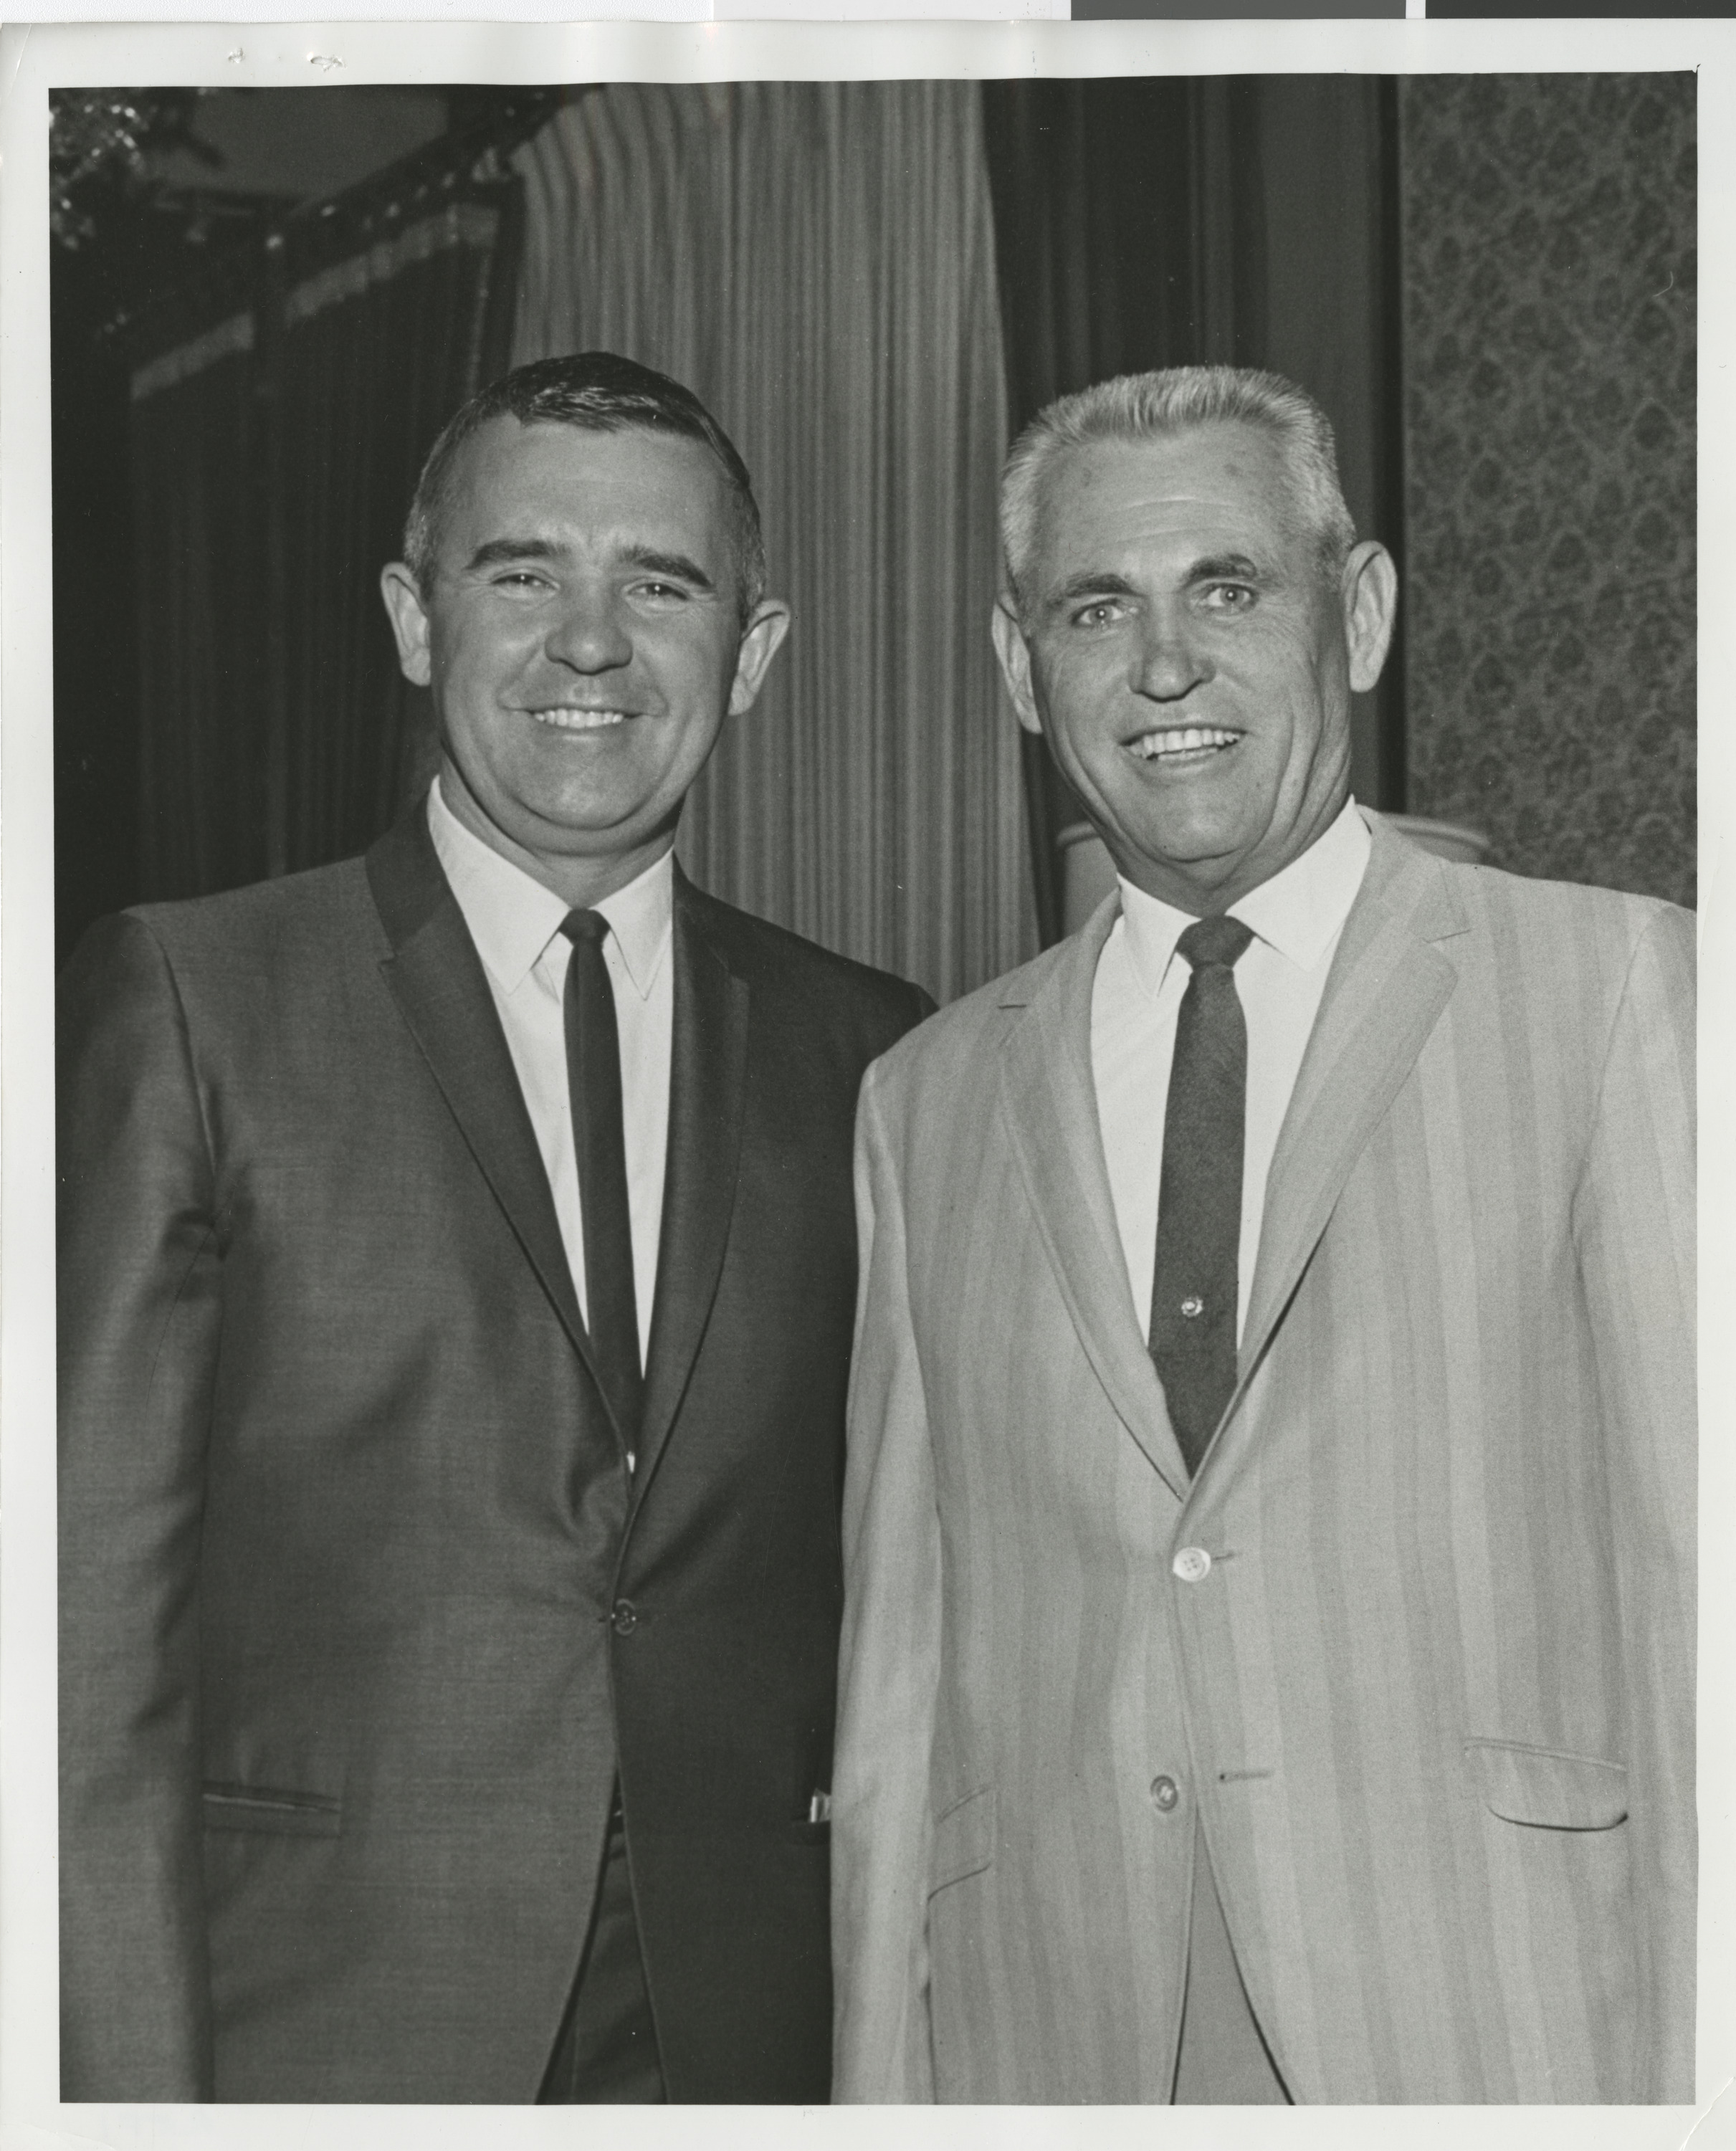 Photograph of Governor Paul Laxalt and Mayor Oran Gragson at the Israel Peace Rally, June 12, 1967